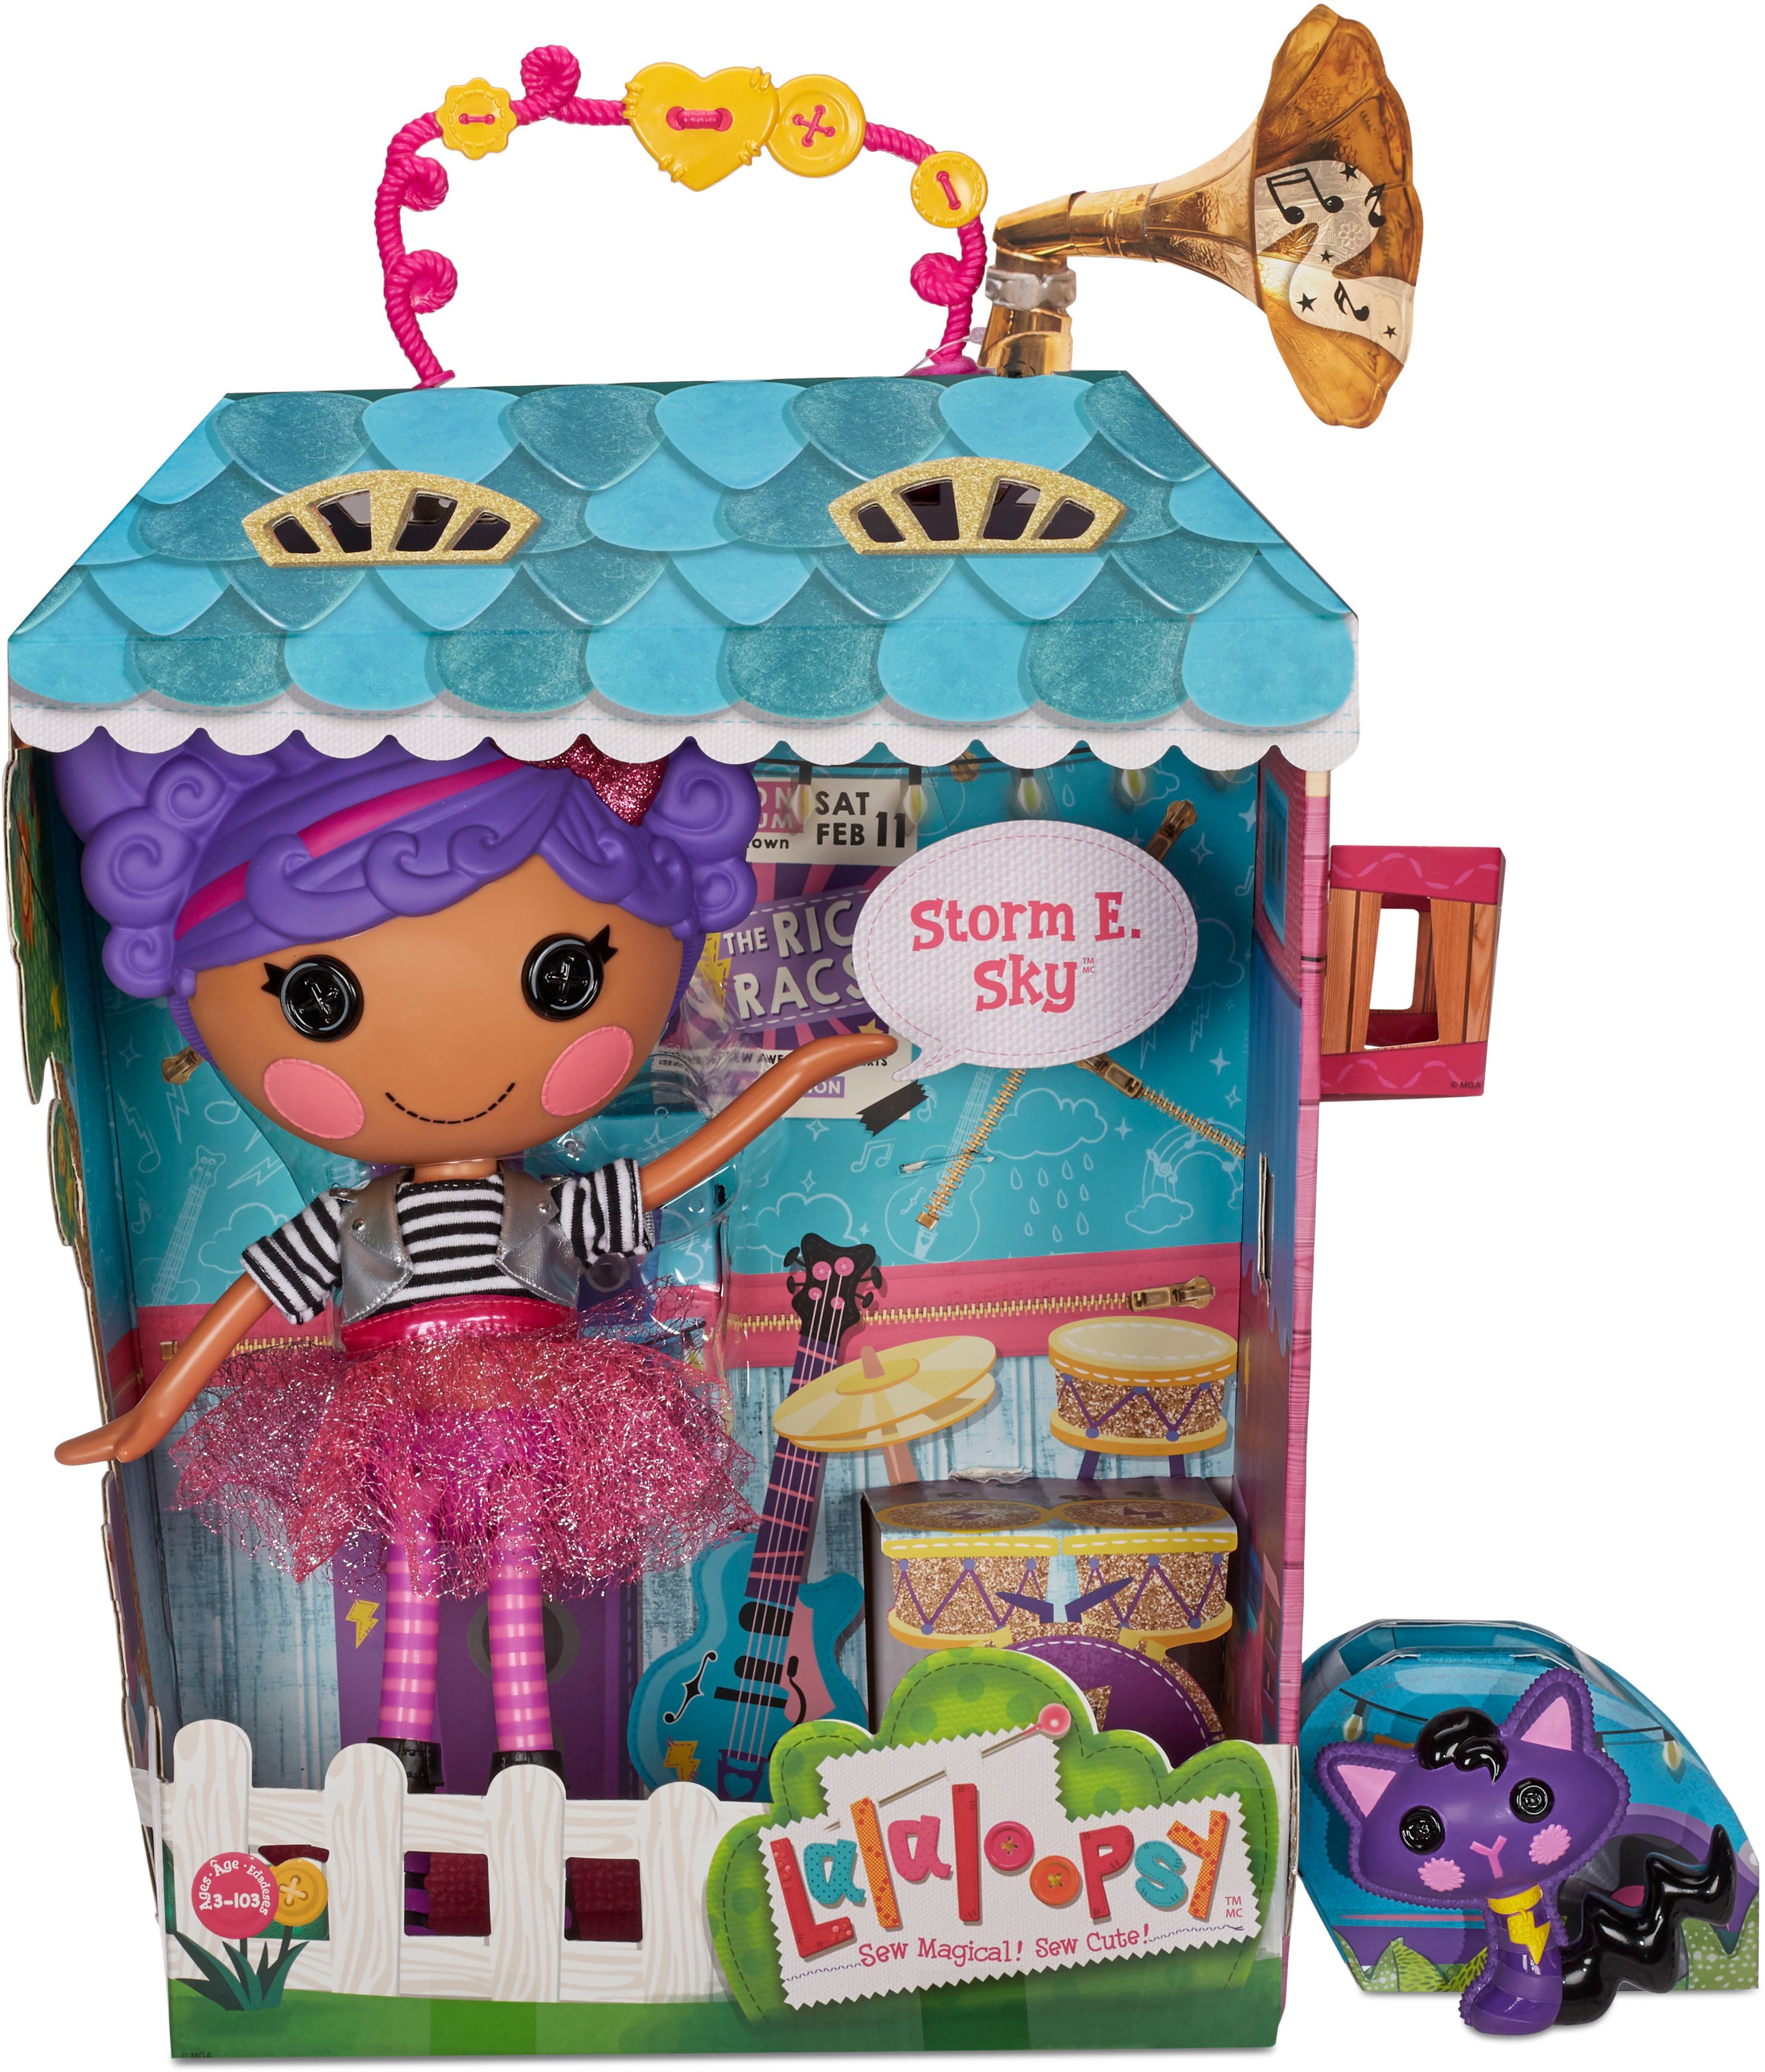 Left View: Lalaloopsy Doll - Storm E. Sky with Pet Cool Cat, 13" Rocker Musician Purple Doll with Changeable Pink and Black Outfit and Shoes, in Reusable Camper House Package Playset, for Ages 3-103